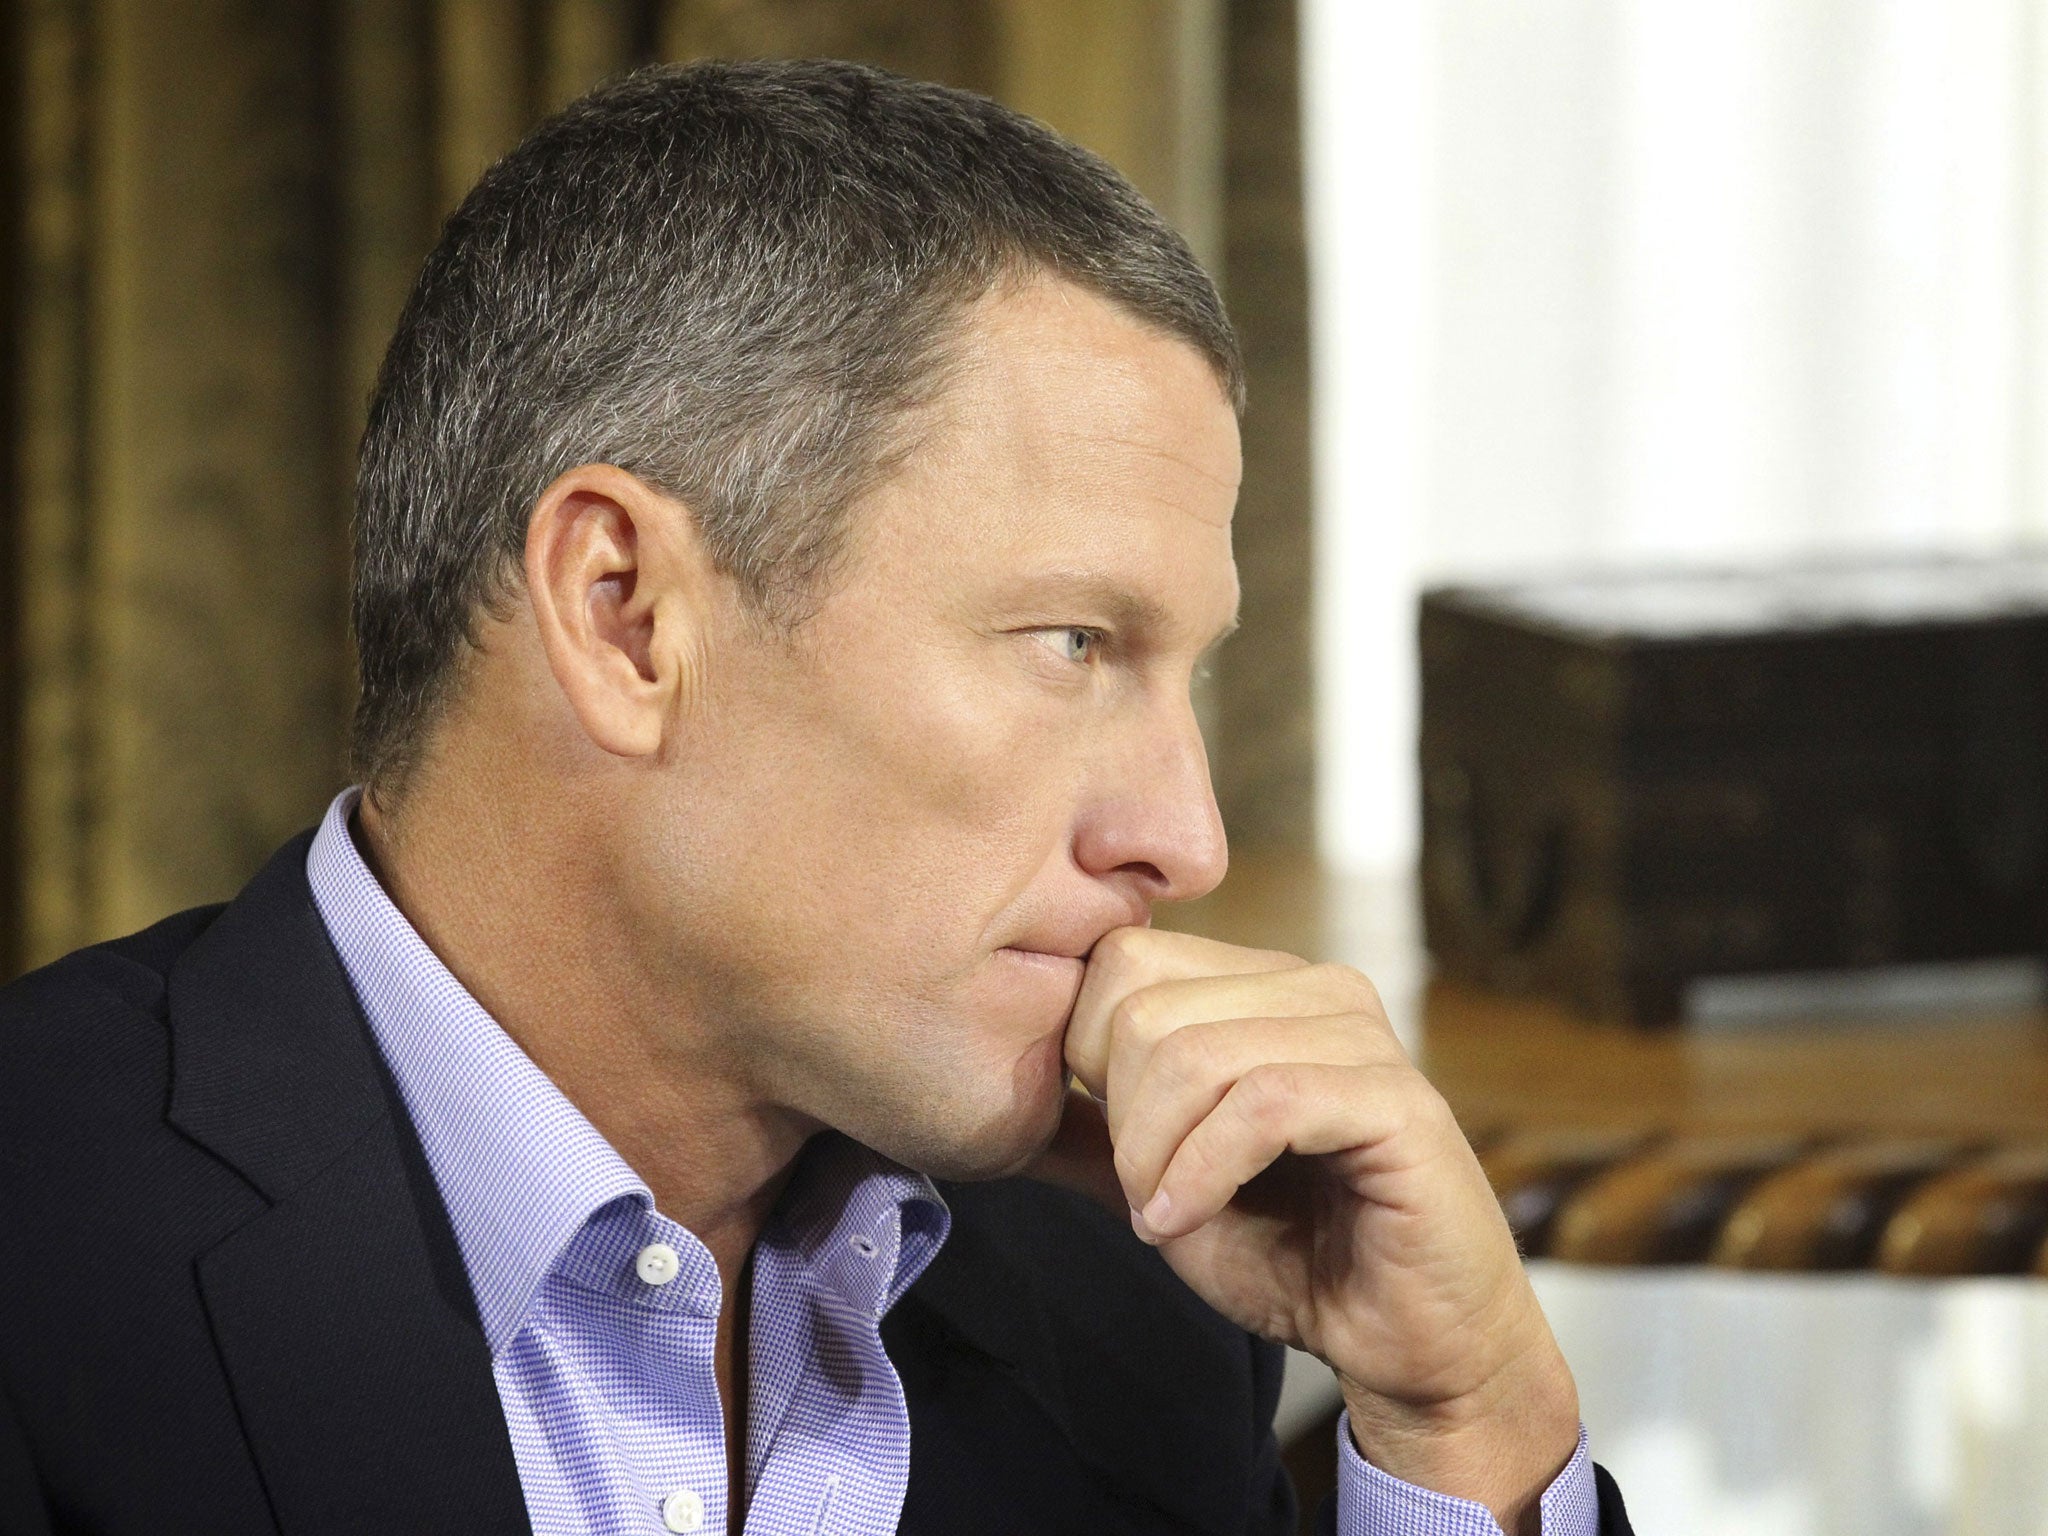 Lance Armstrong has rejected another deadline to meet anti-doping investigators